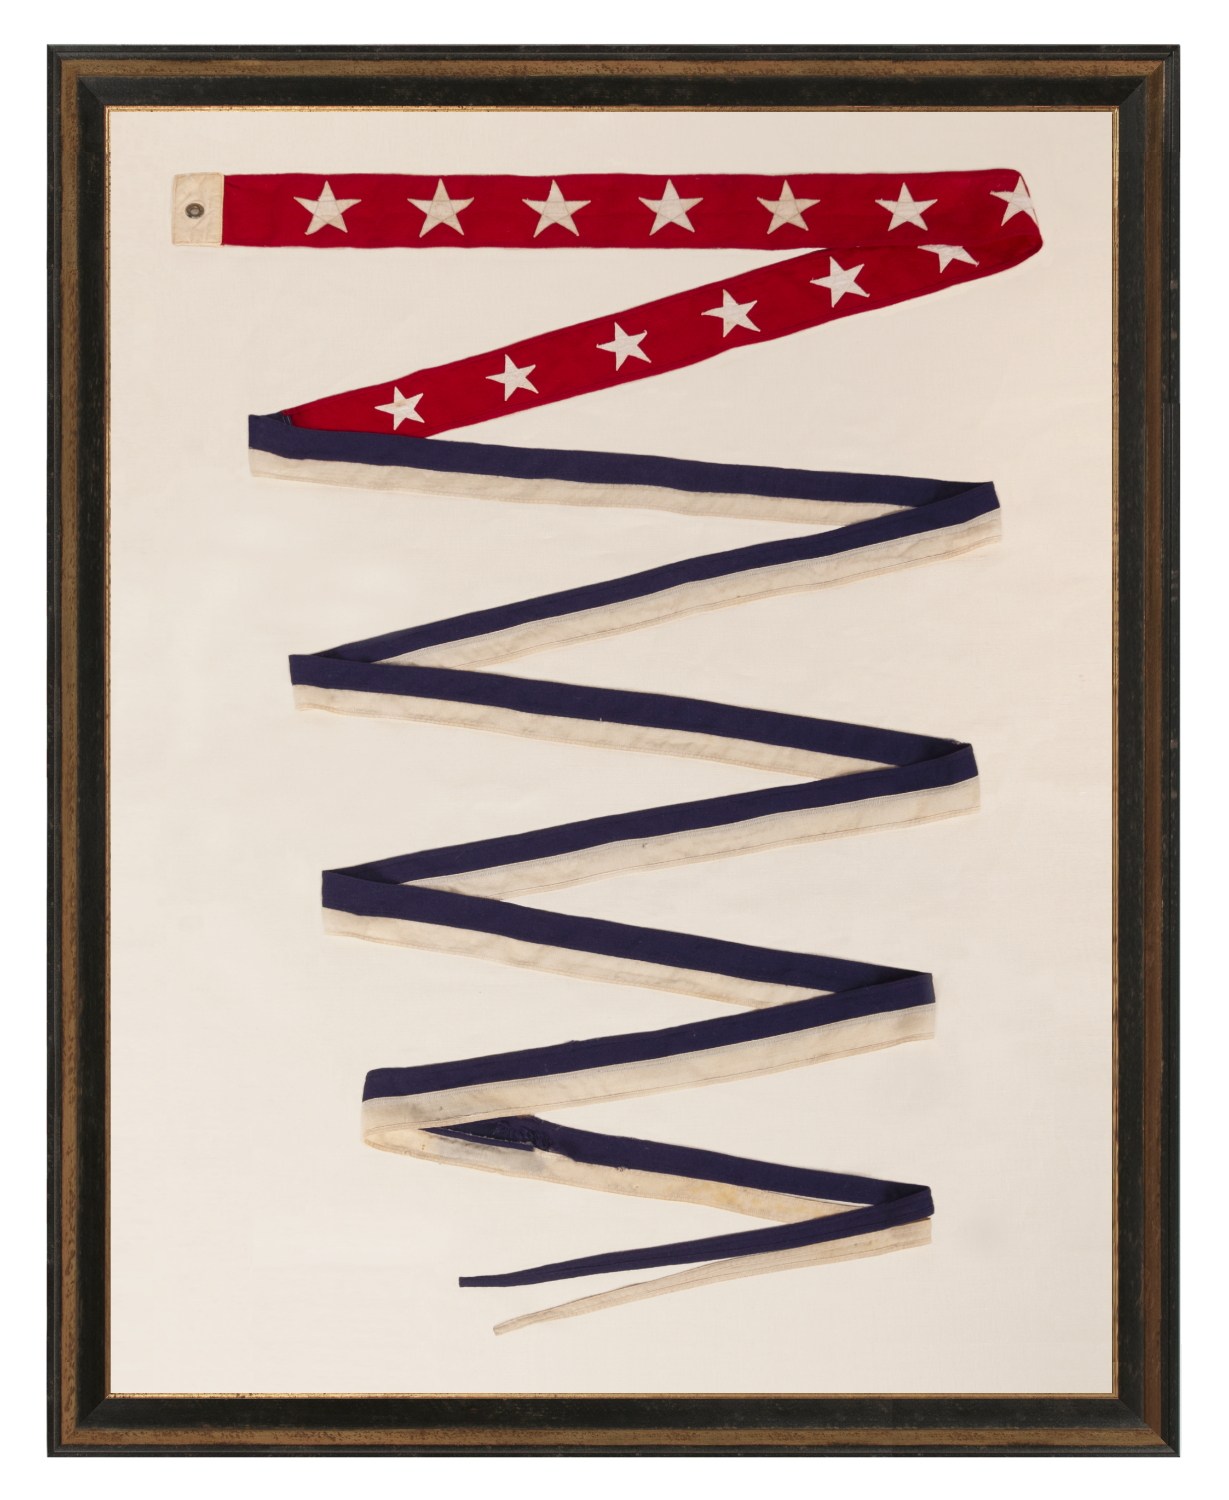 EXTREMELY RARE U.S. WAR DEPARTMENT COMMISSIONING PENNANT WITH 13 STARS, A REVERSAL OF THE U.S. NAVY COLOR SCHEME, TWENTY-FOUR FEET ON THE FLY, SPANISH-AMERICAN WAR - WWI ERA (1898-1917)